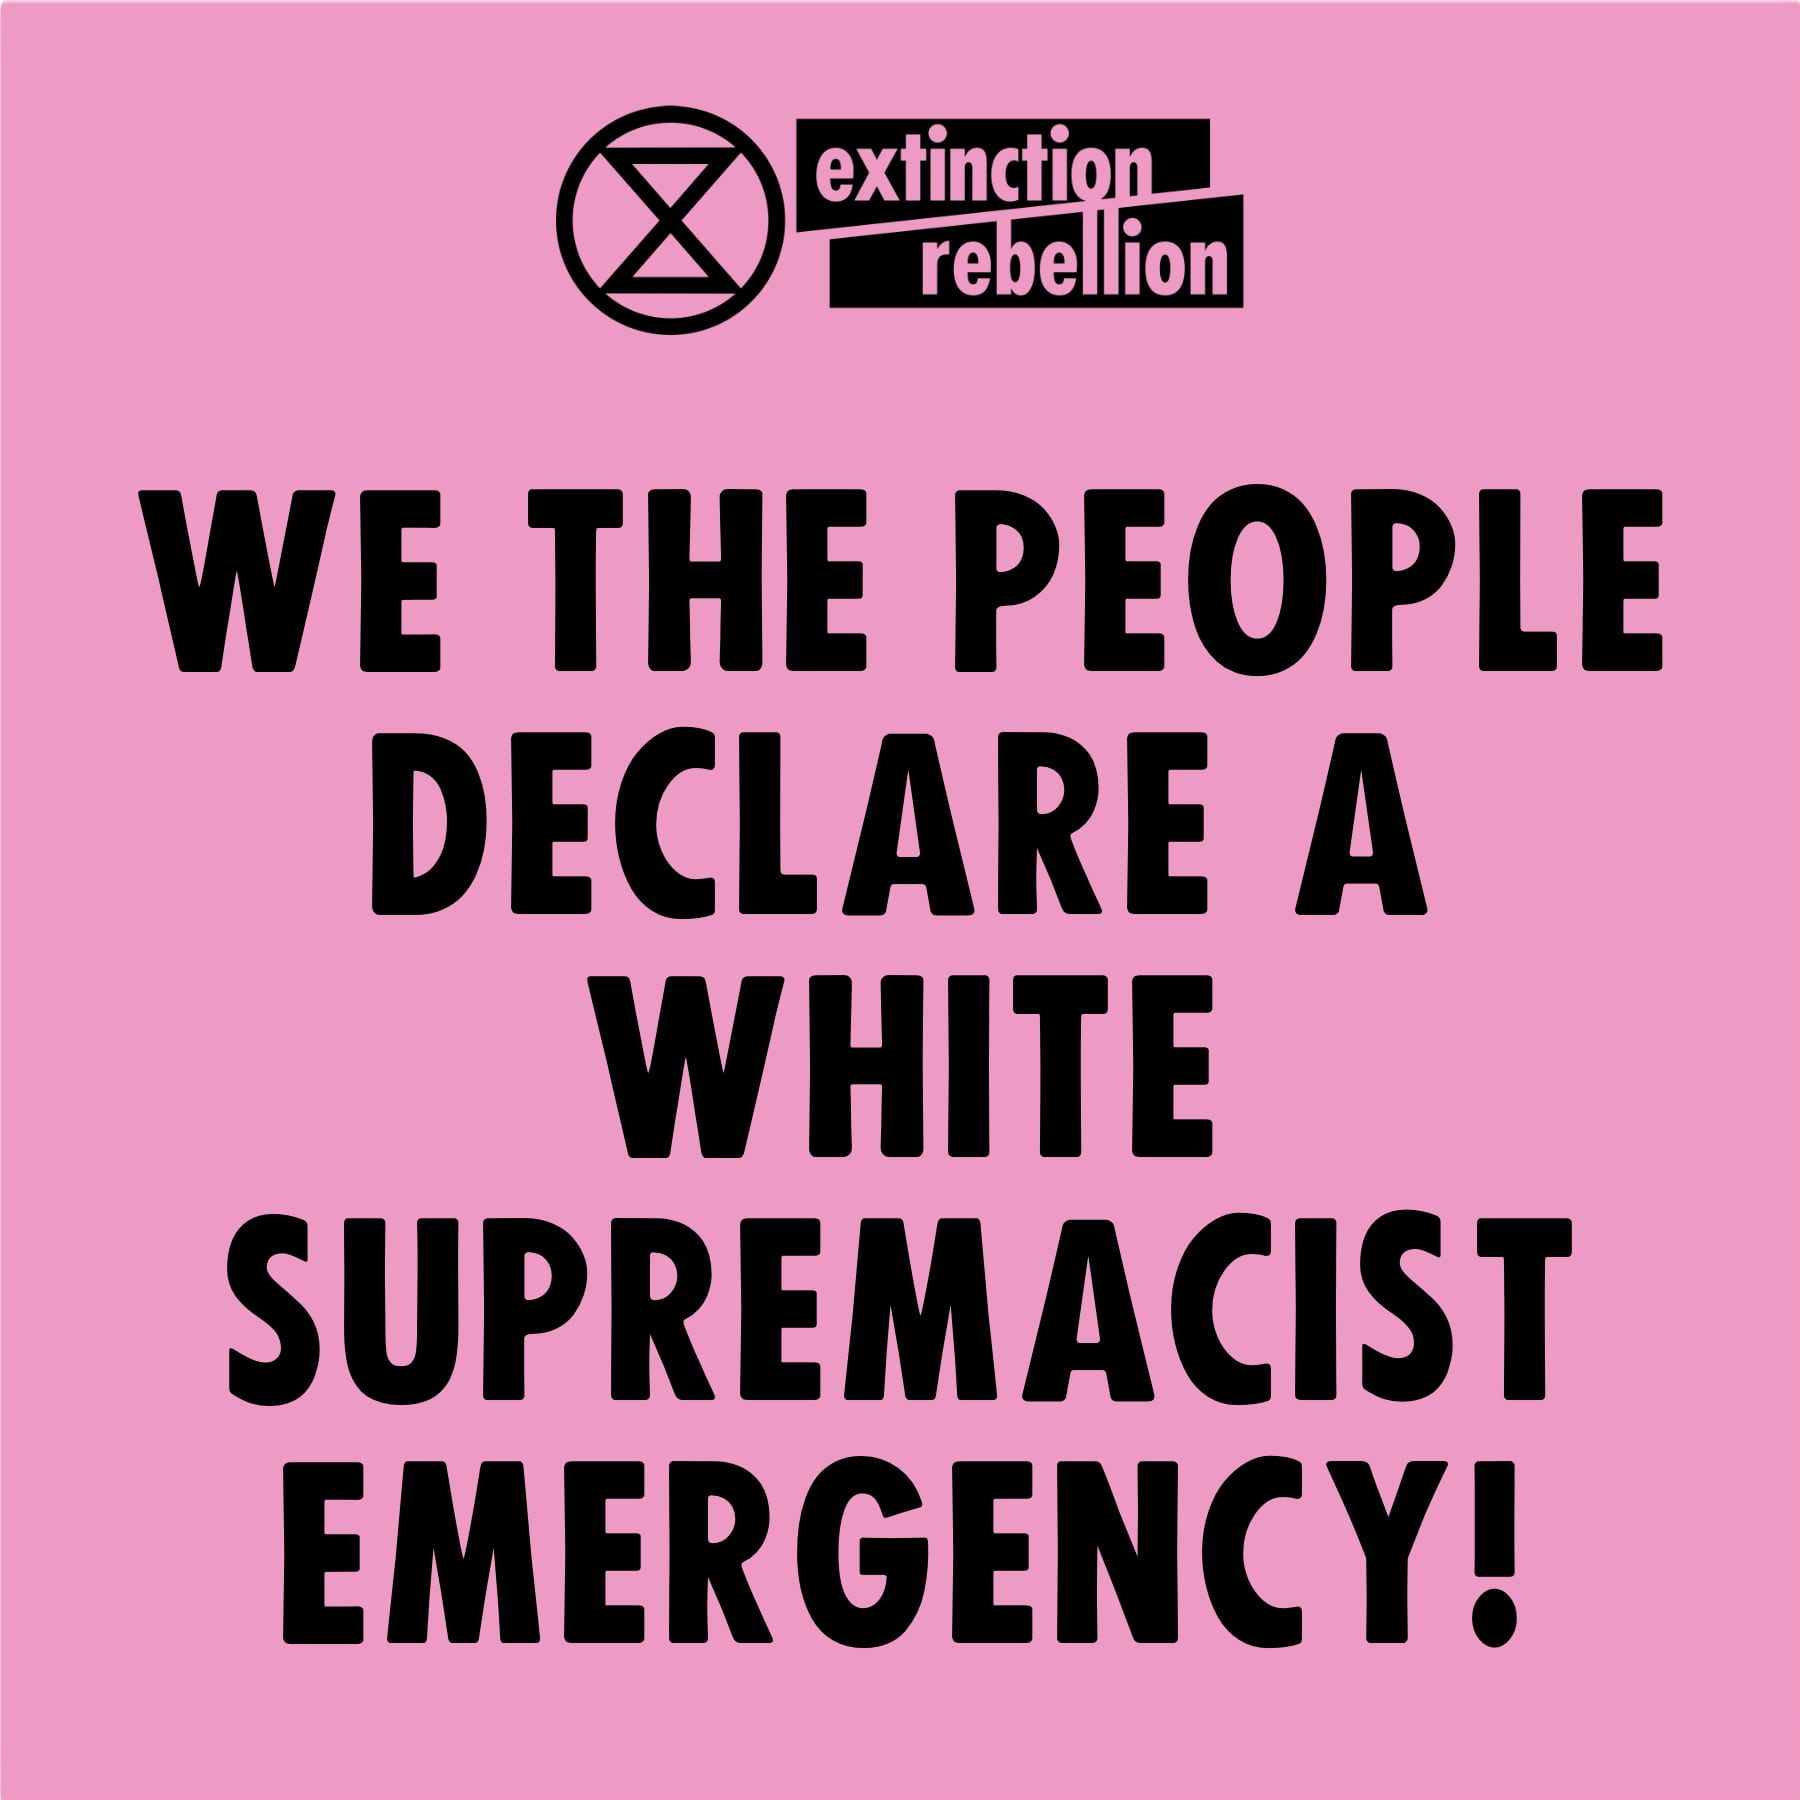 A poster: We the People Declare a White Supremacist Emergency!